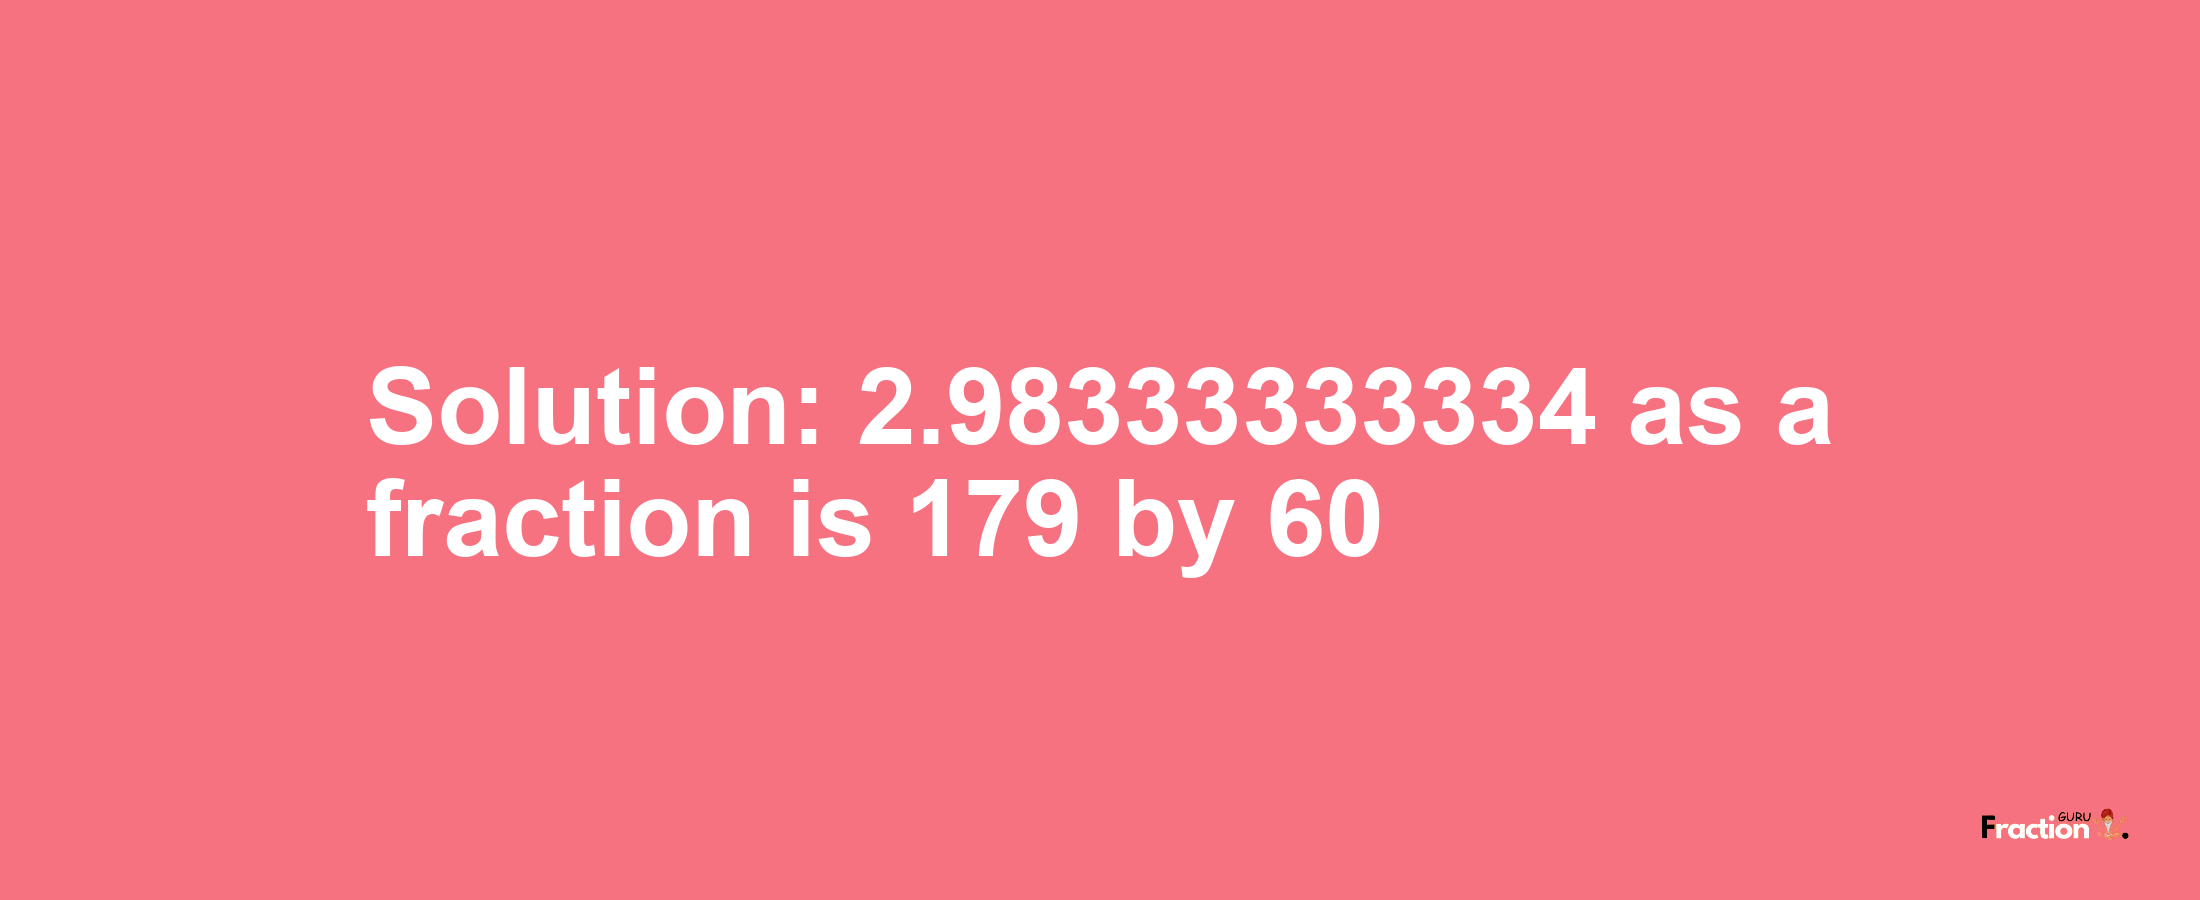 Solution:2.98333333334 as a fraction is 179/60